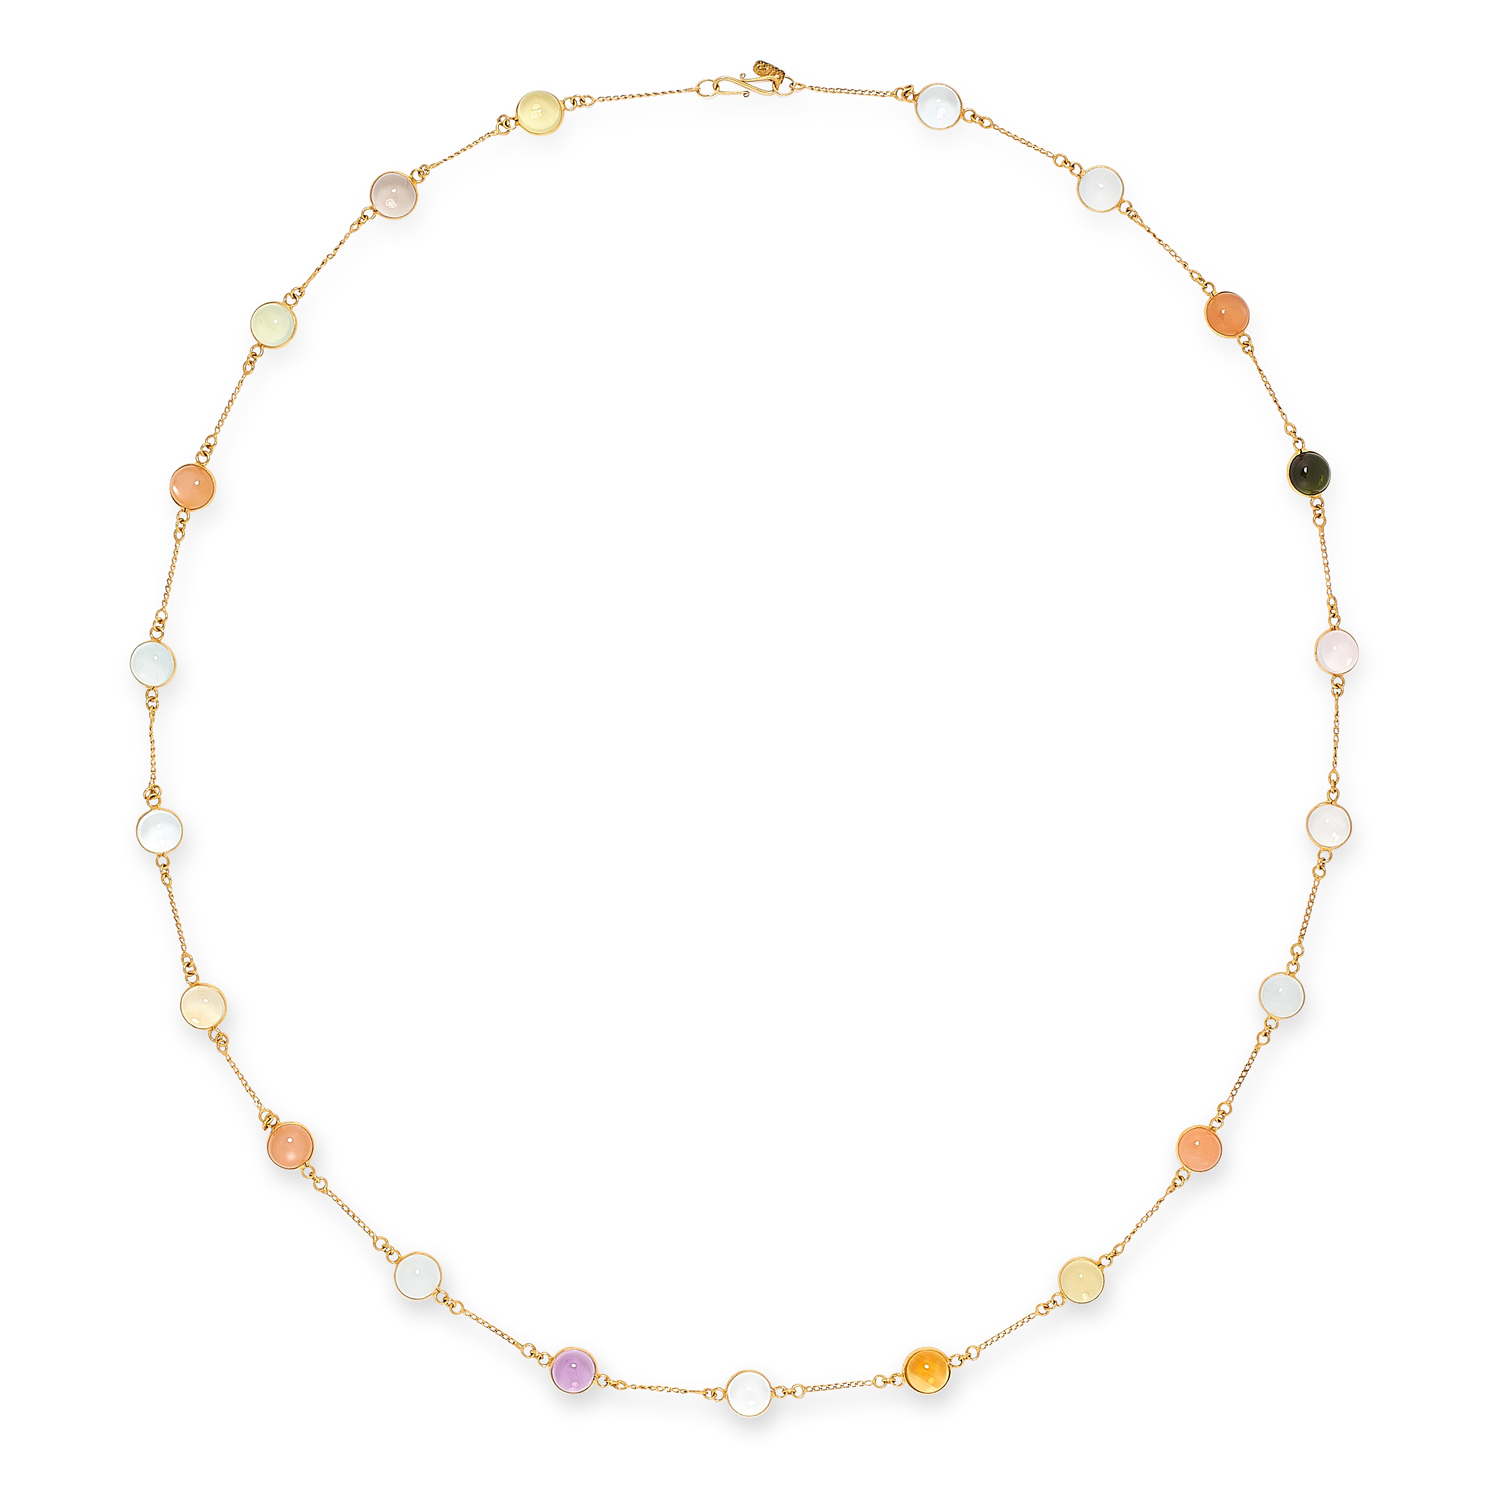 A MULTICOLOURED GEMSTONE NECKLACE set with round cabochon green tourmaline, amethyst, citrine,